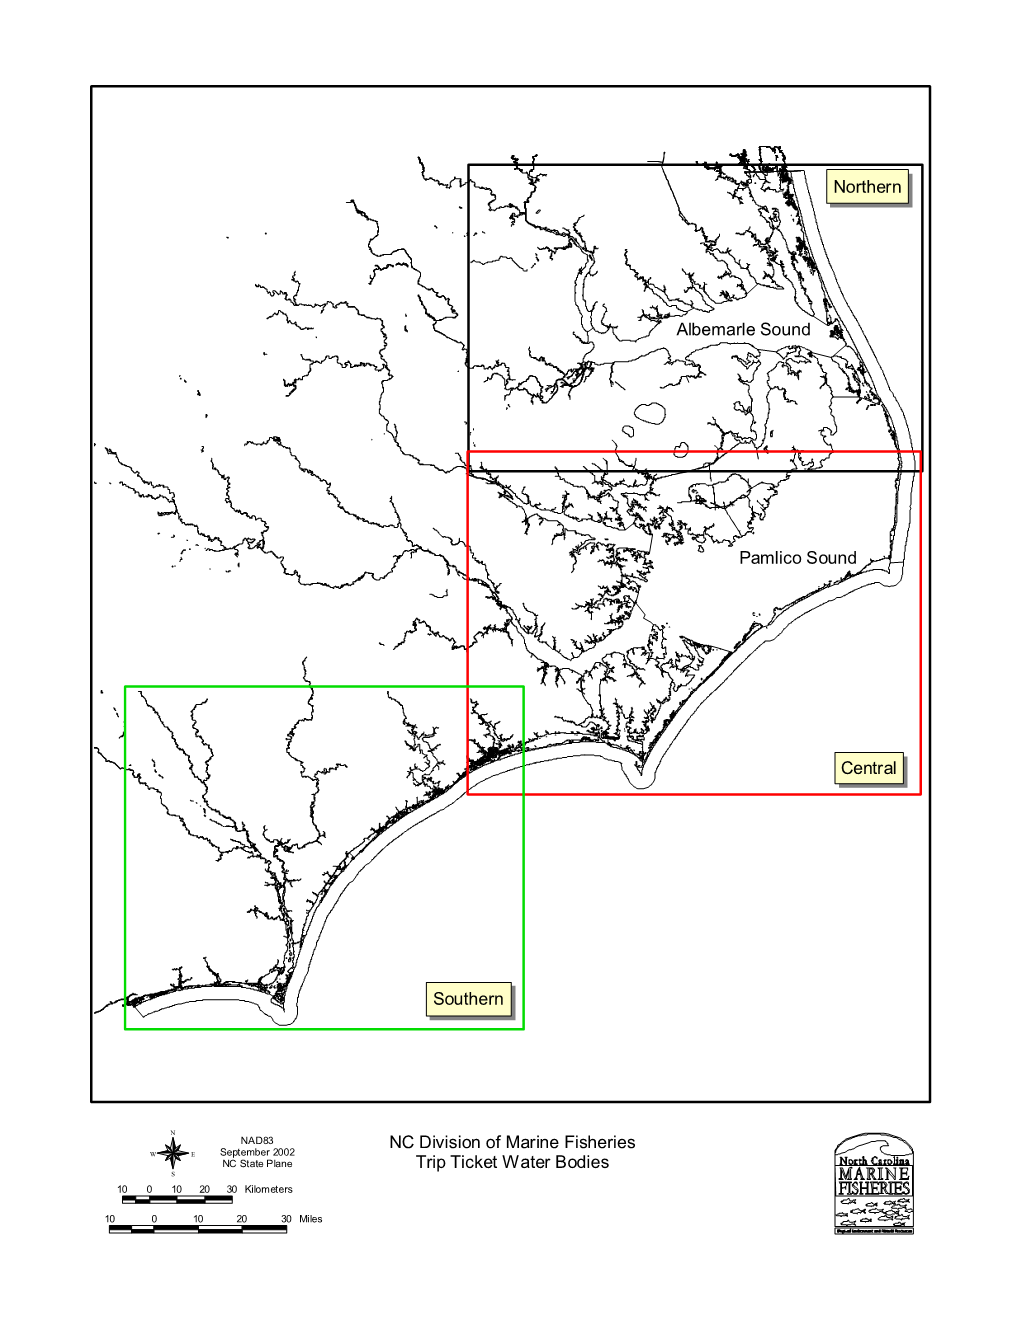 Northern Central Southern Albemarle Sound Pamlico Sound NC Division